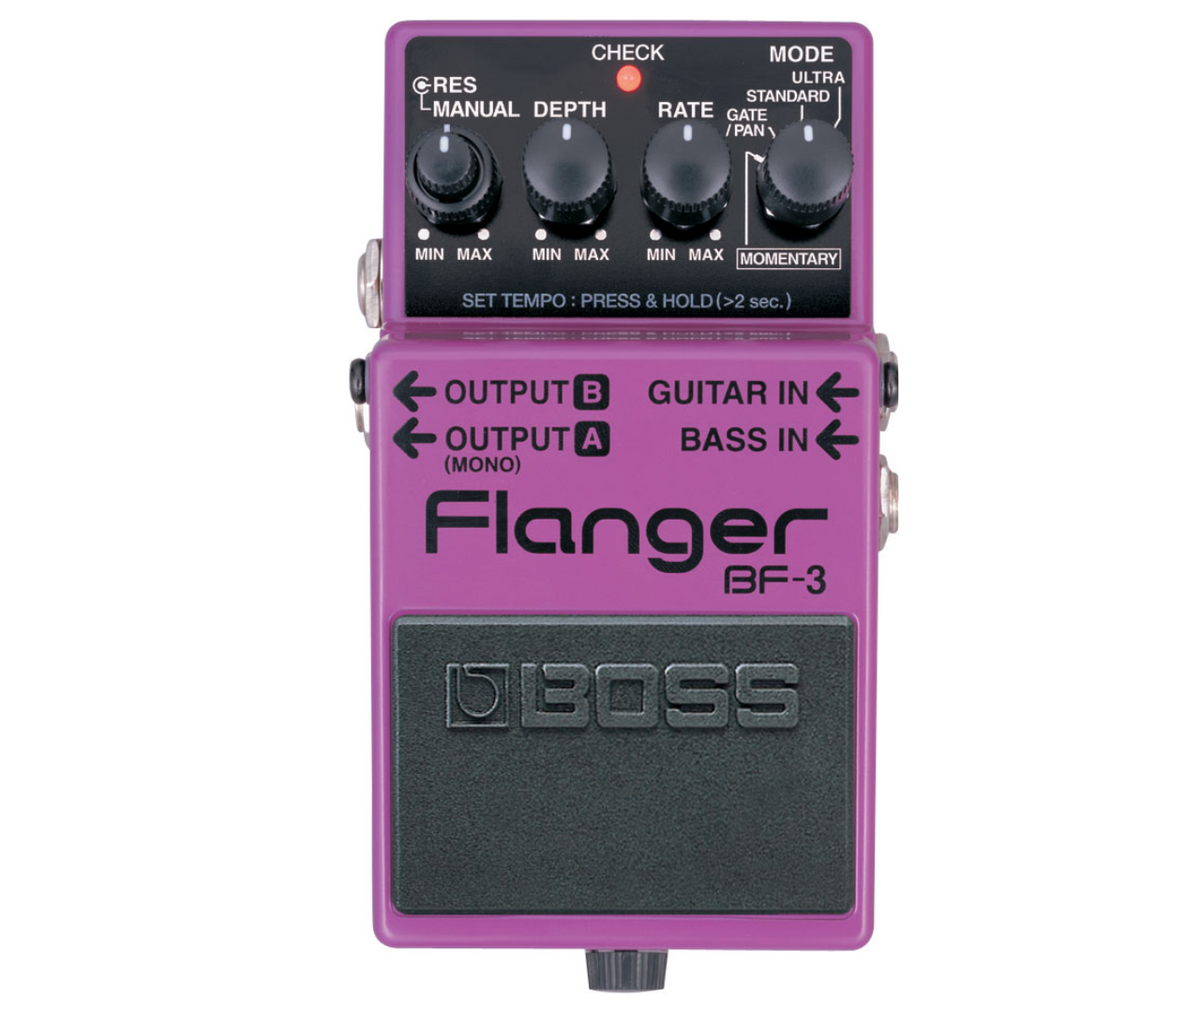 BOSS BF-3 Flanger Best Guitar Effects Pedal Best Flanging Effects with Tap Tempo and Stereo Output